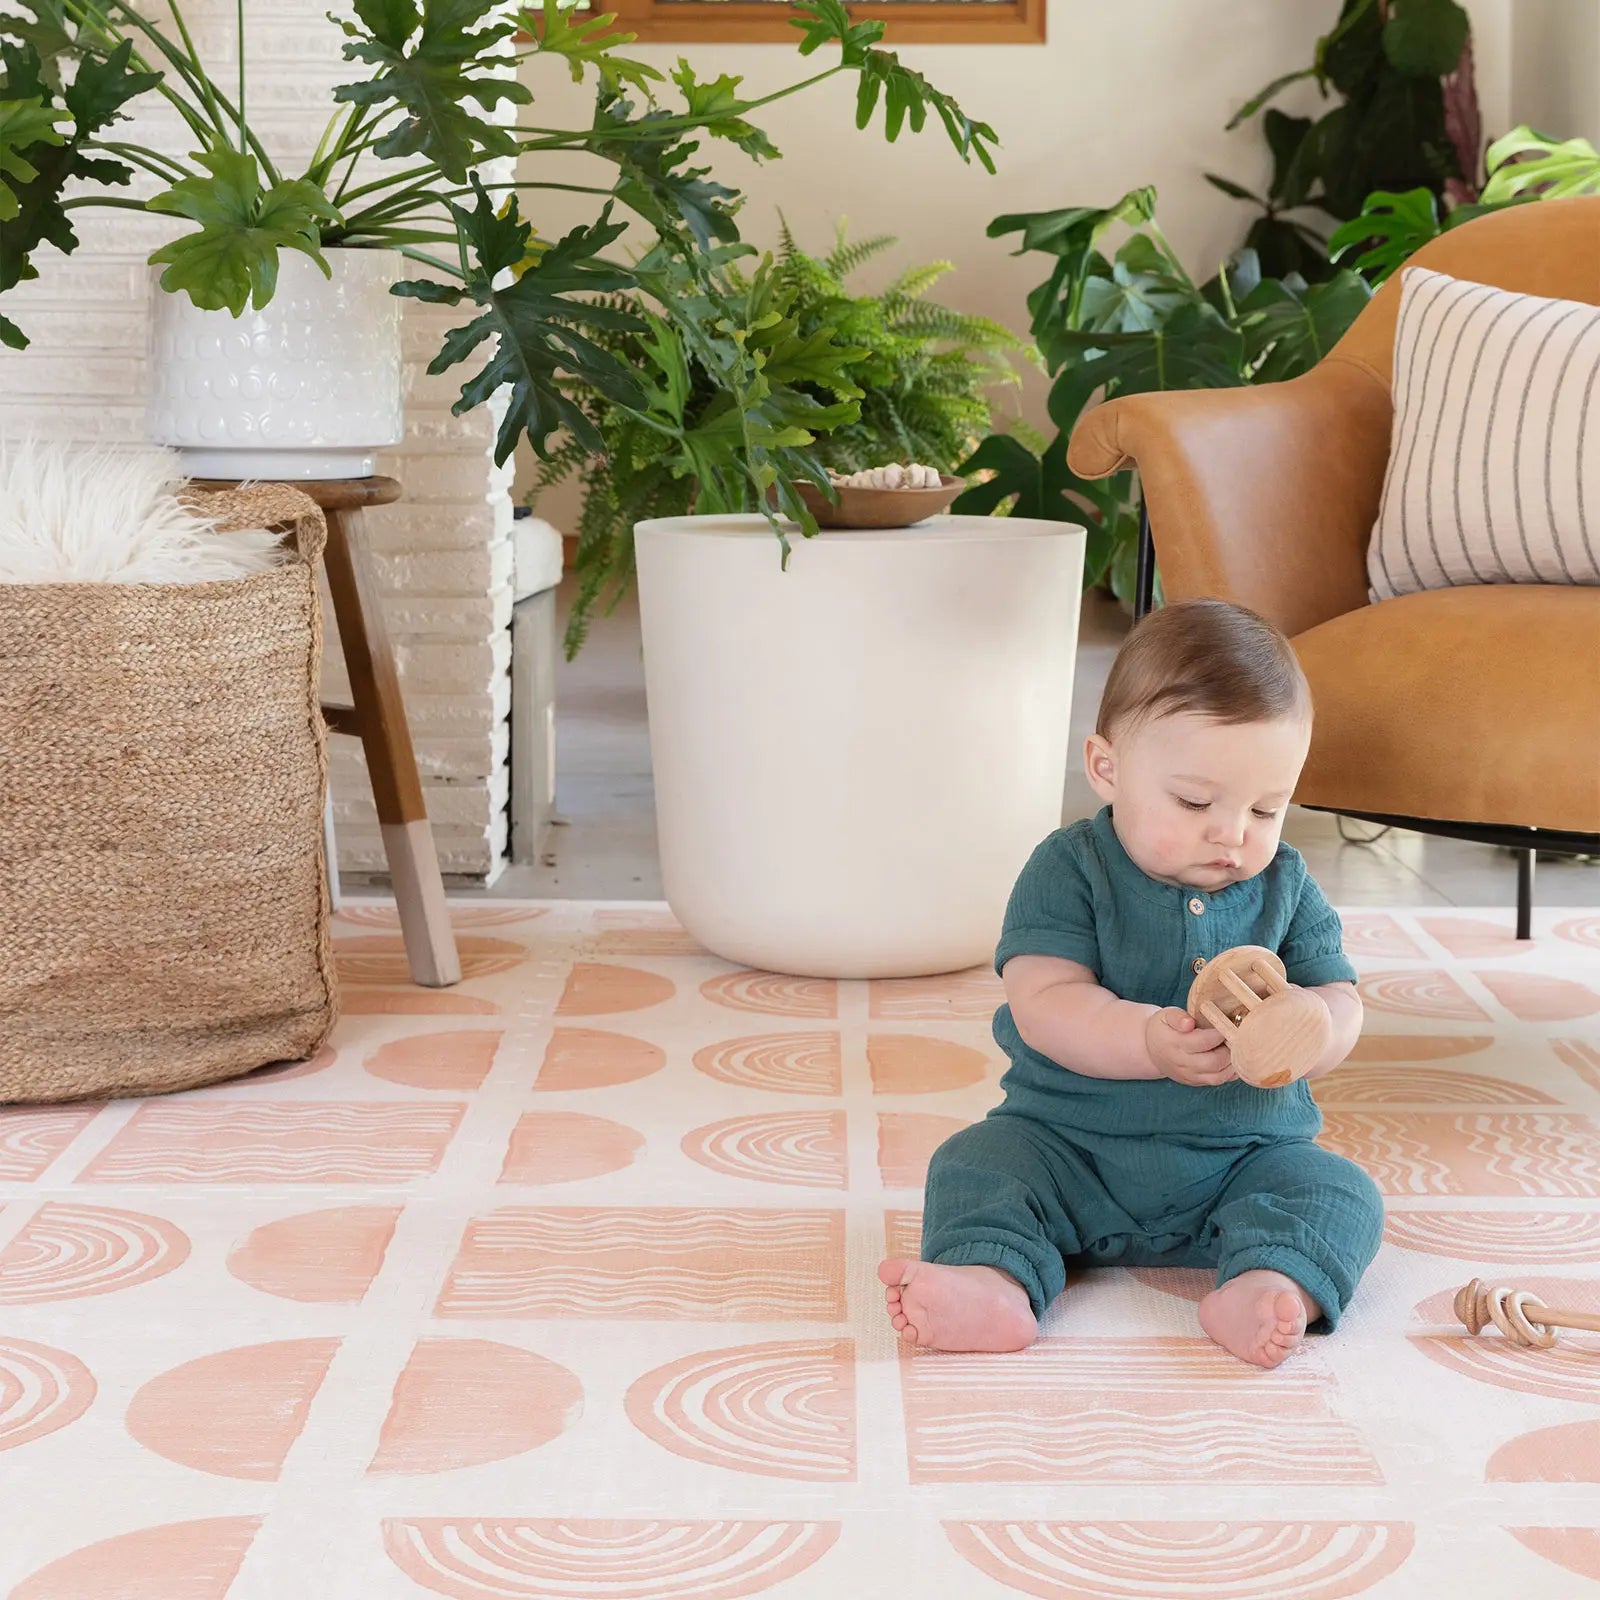 Ada melon pink and off white block print baby play mat. Shown in living room baby playing with toys.